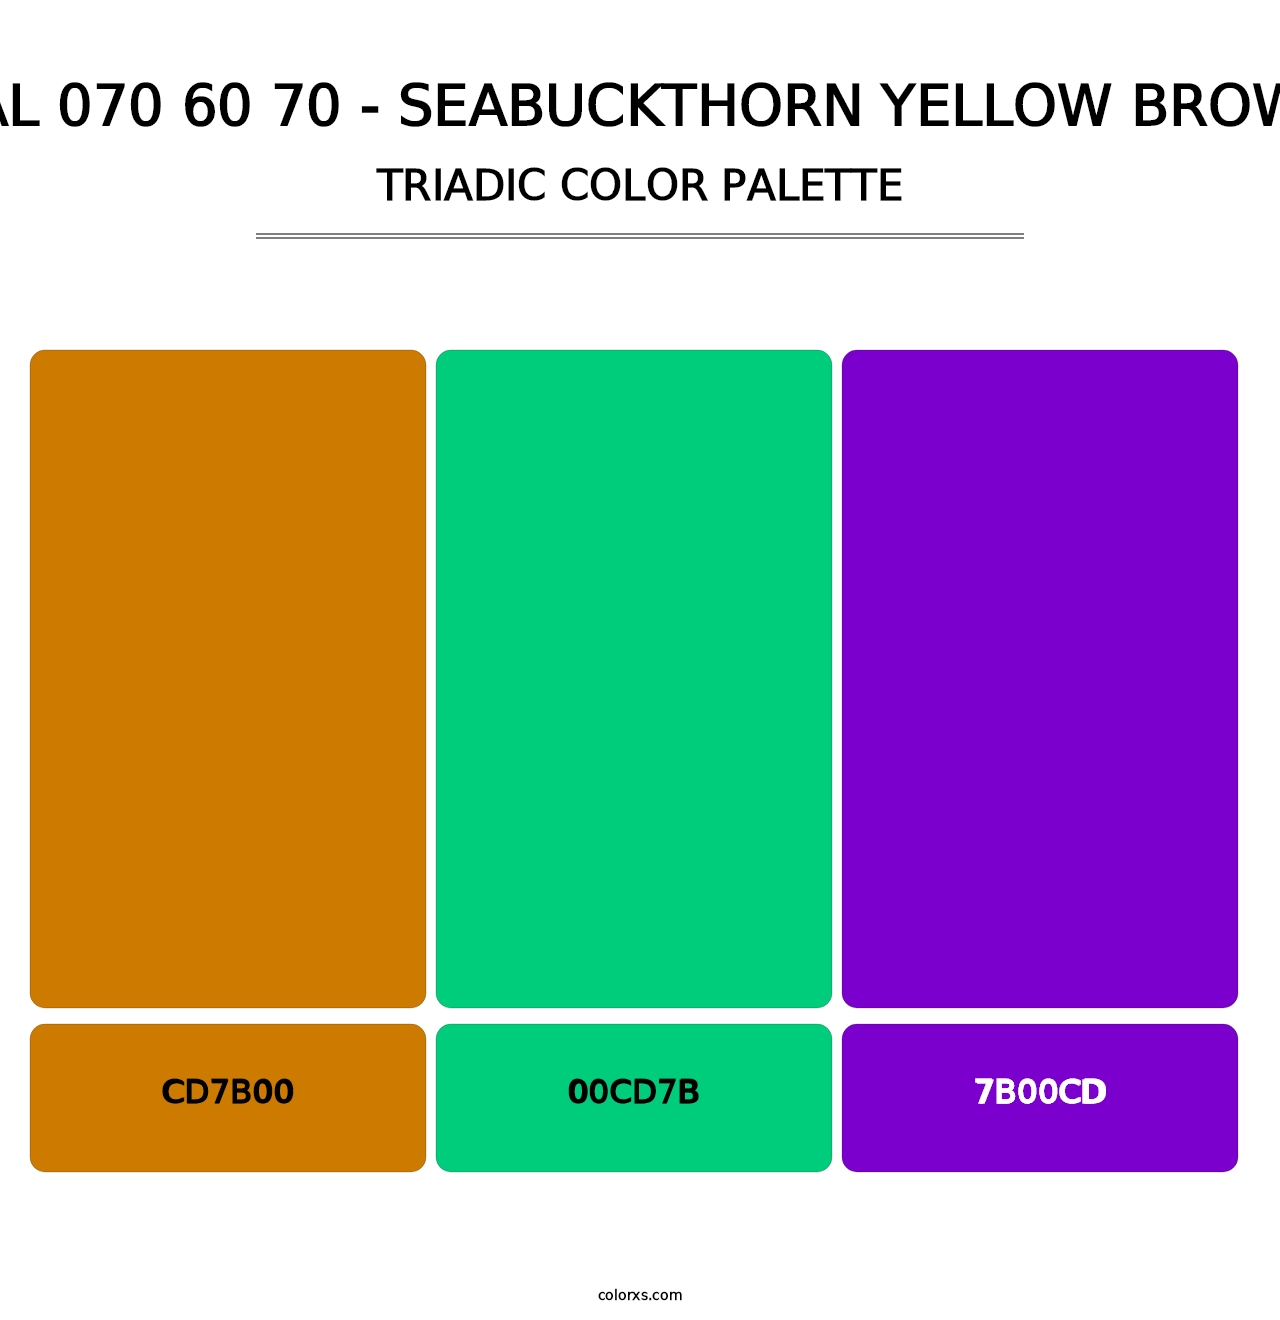 RAL 070 60 70 - Seabuckthorn Yellow Brown - Triadic Color Palette